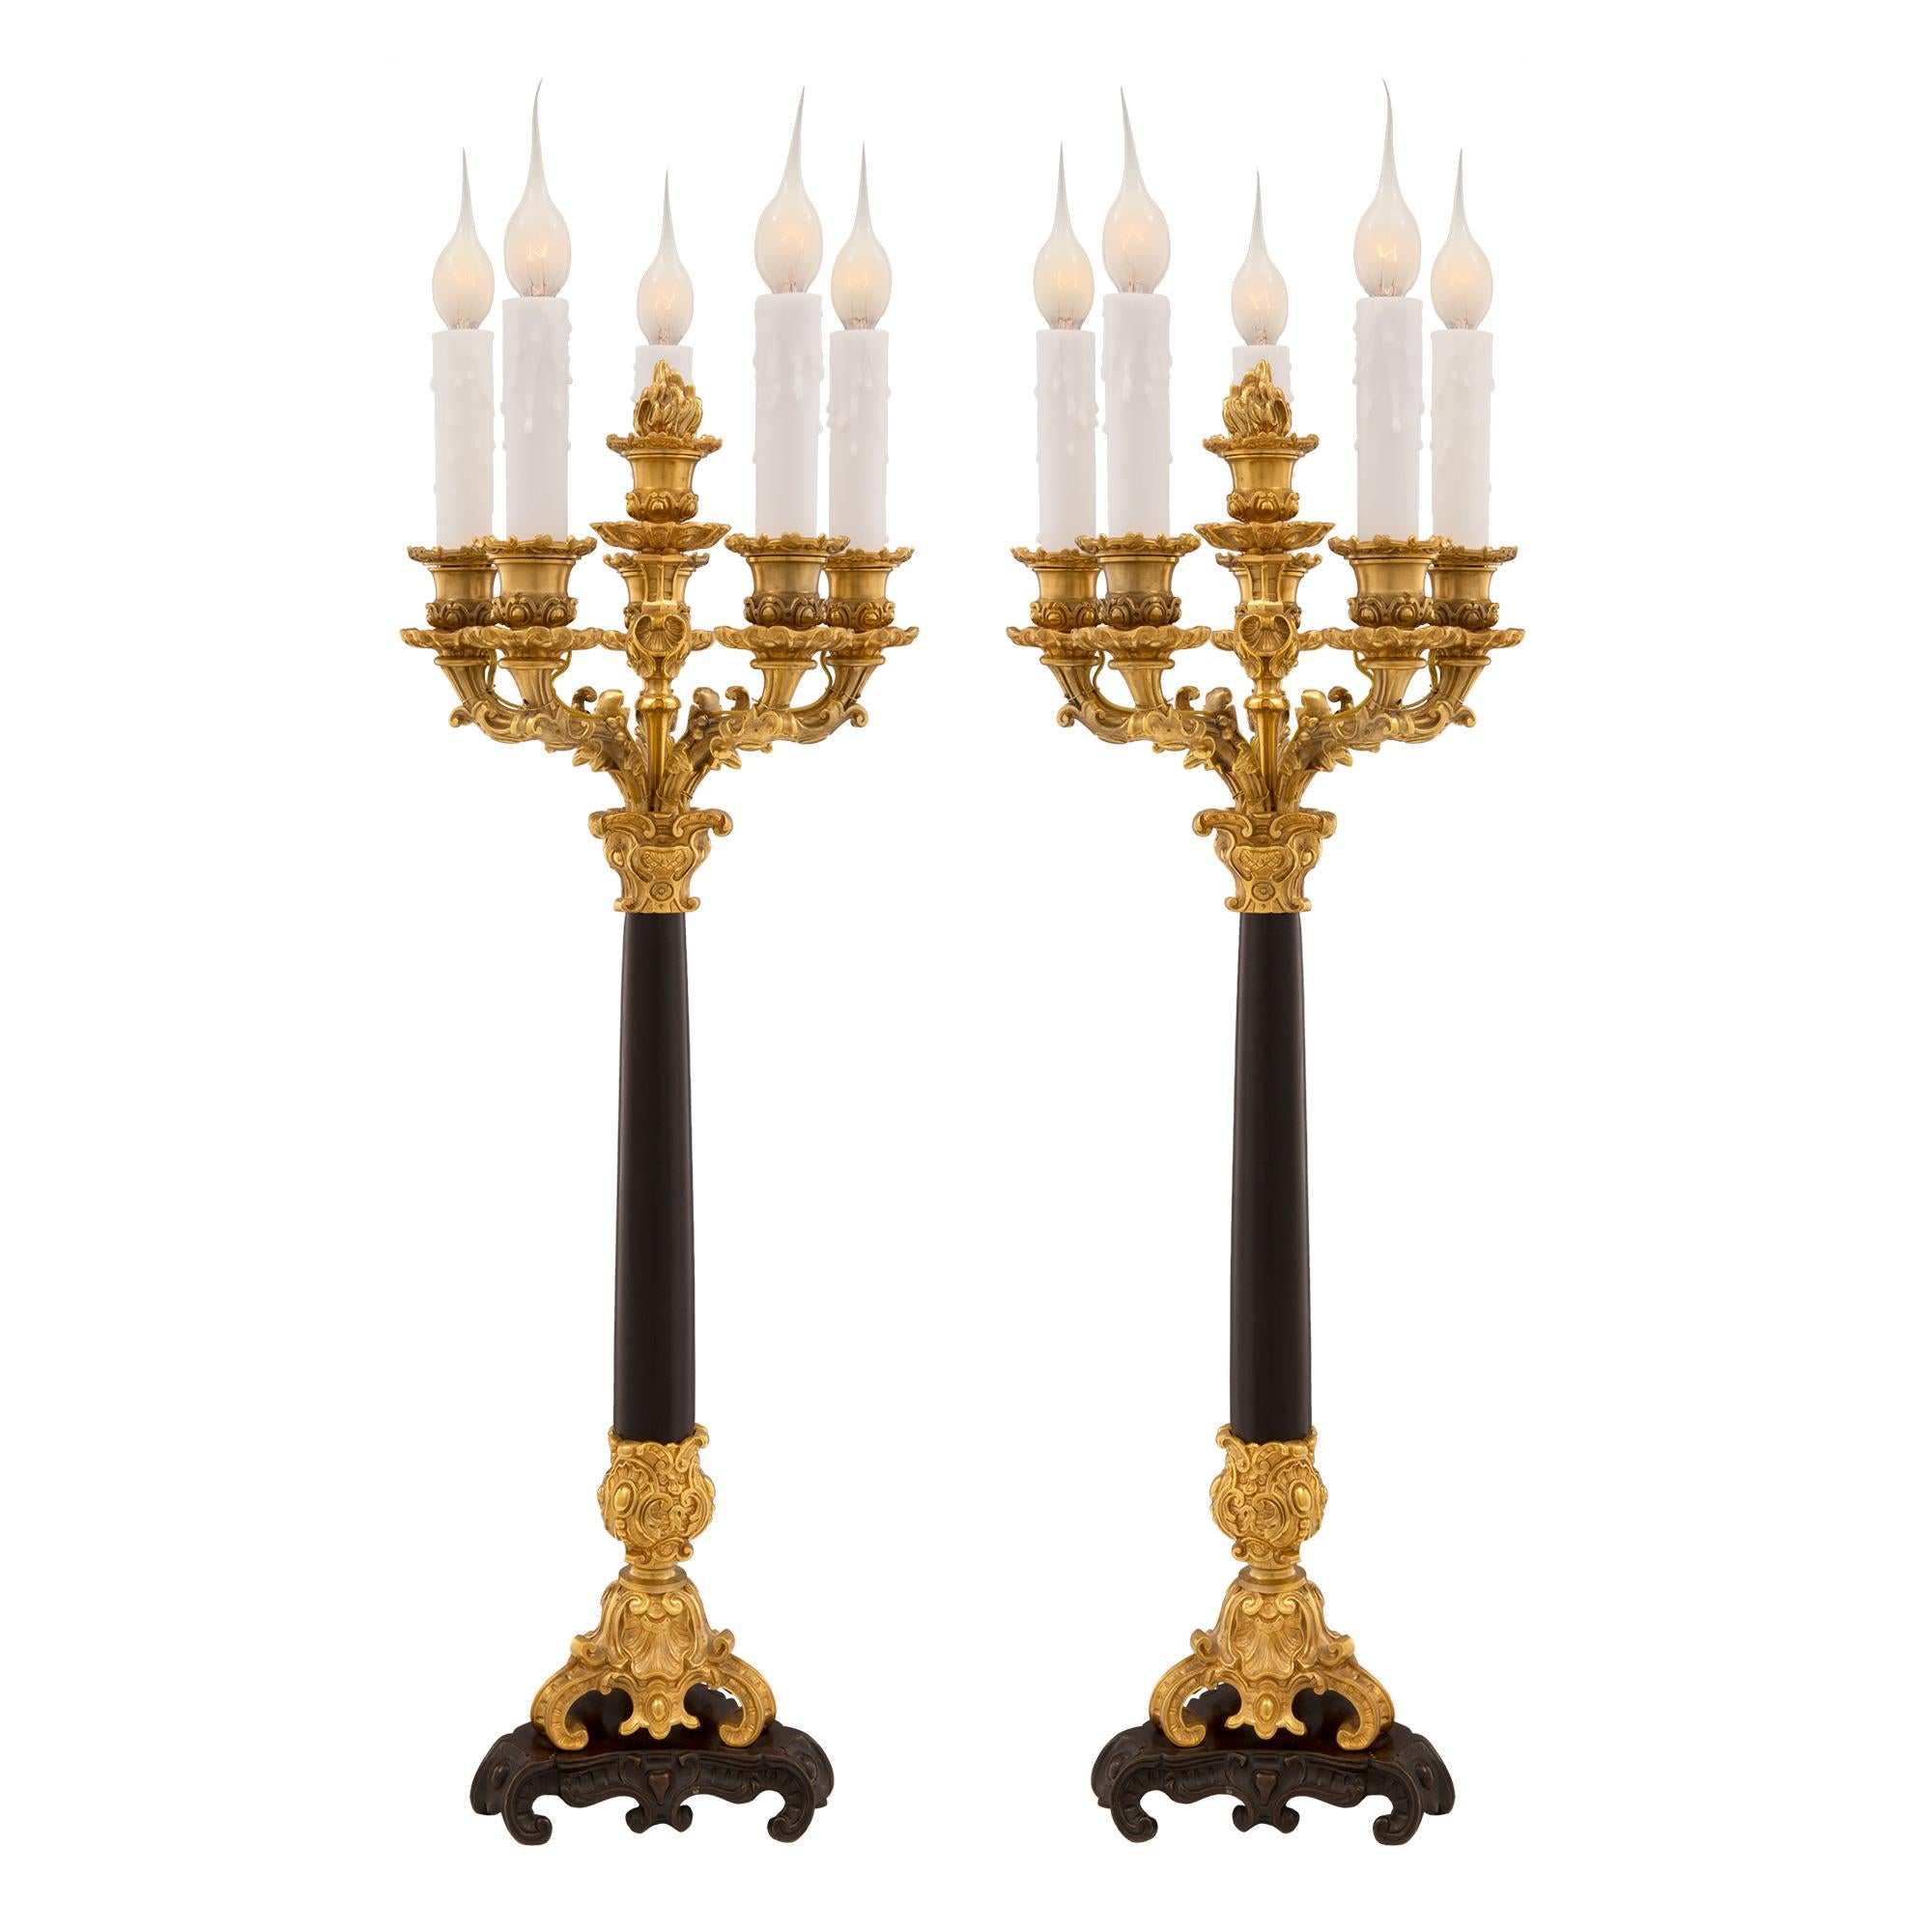 A most impressive and high quality pair of French mid 19th century neo-classical st. patinated bronze, ormolu and black Belgian marble five arm candelabras lamps. Each lamp is raised by a triangular patinated bronze and ormolu stepped base with